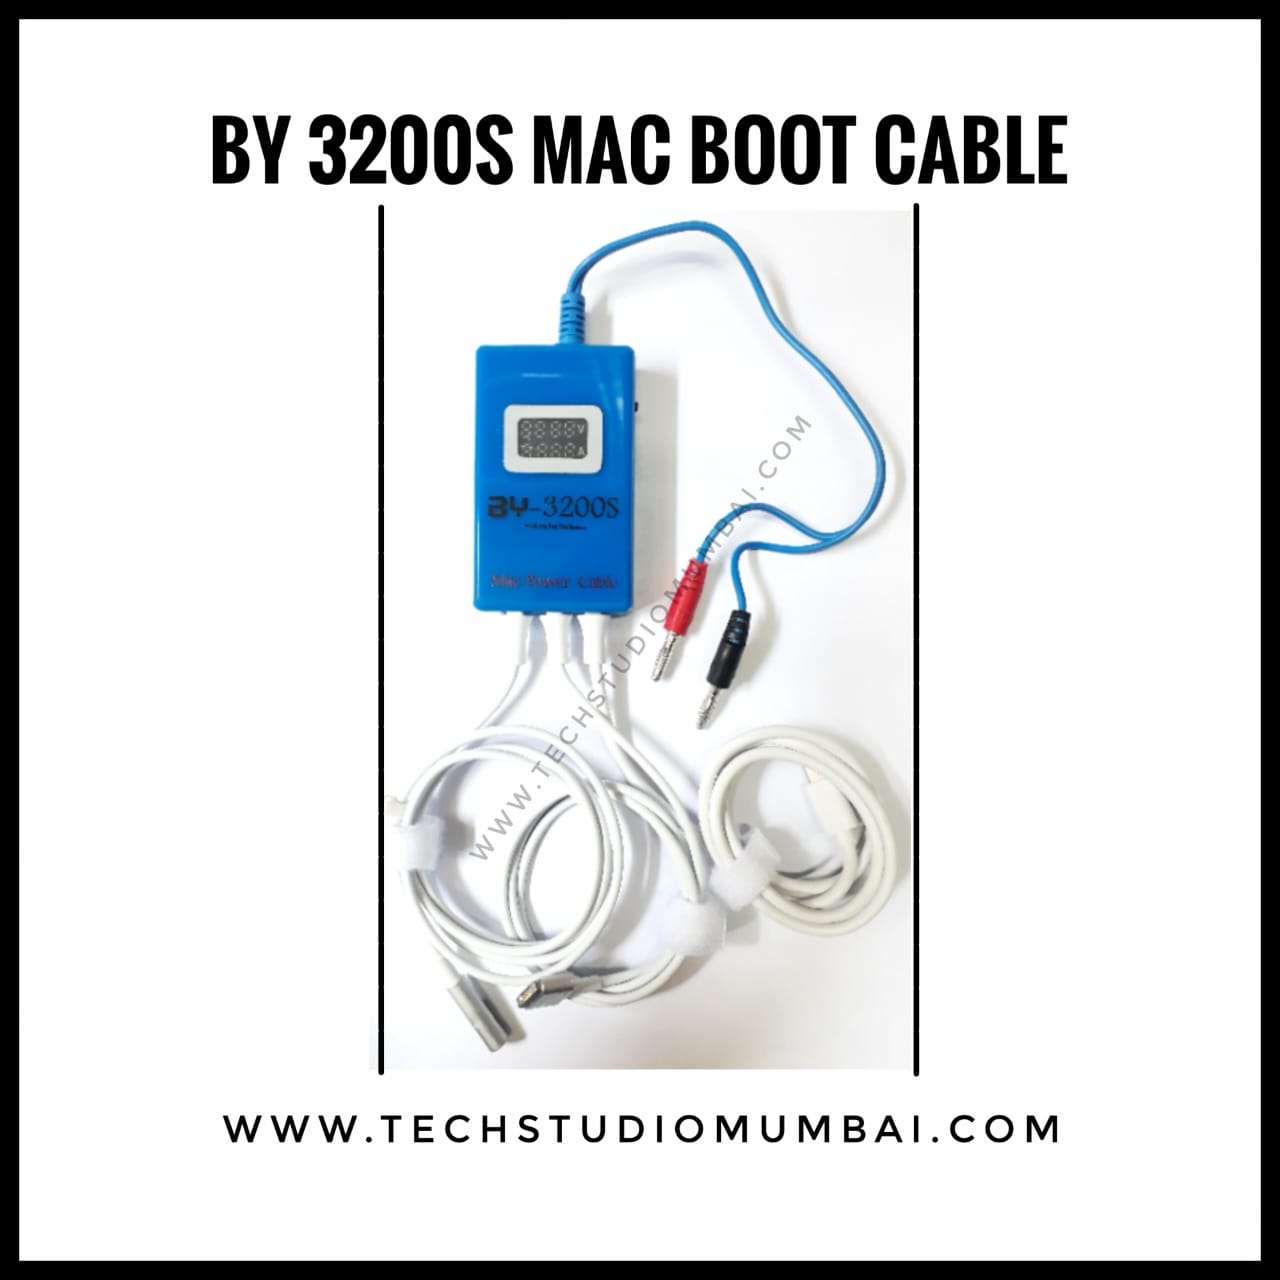 BY-3200s boot cable tool kit for macbook board repair